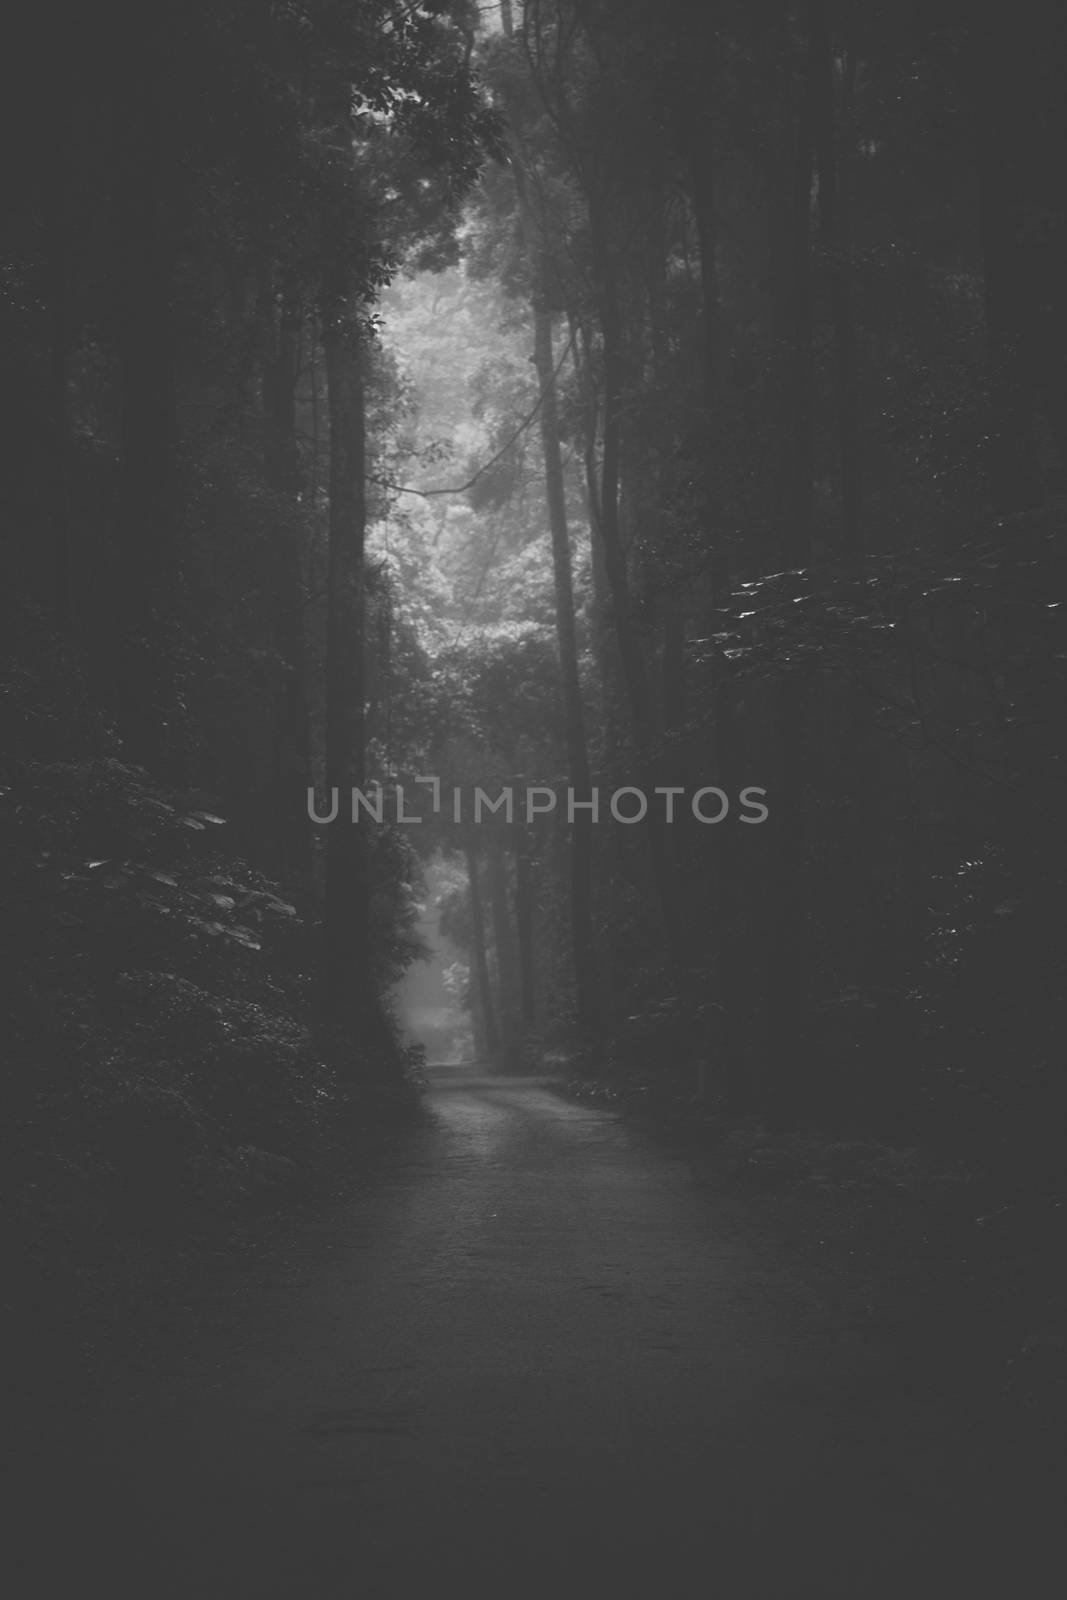 Moody hazy road scene in an overgrown forest.